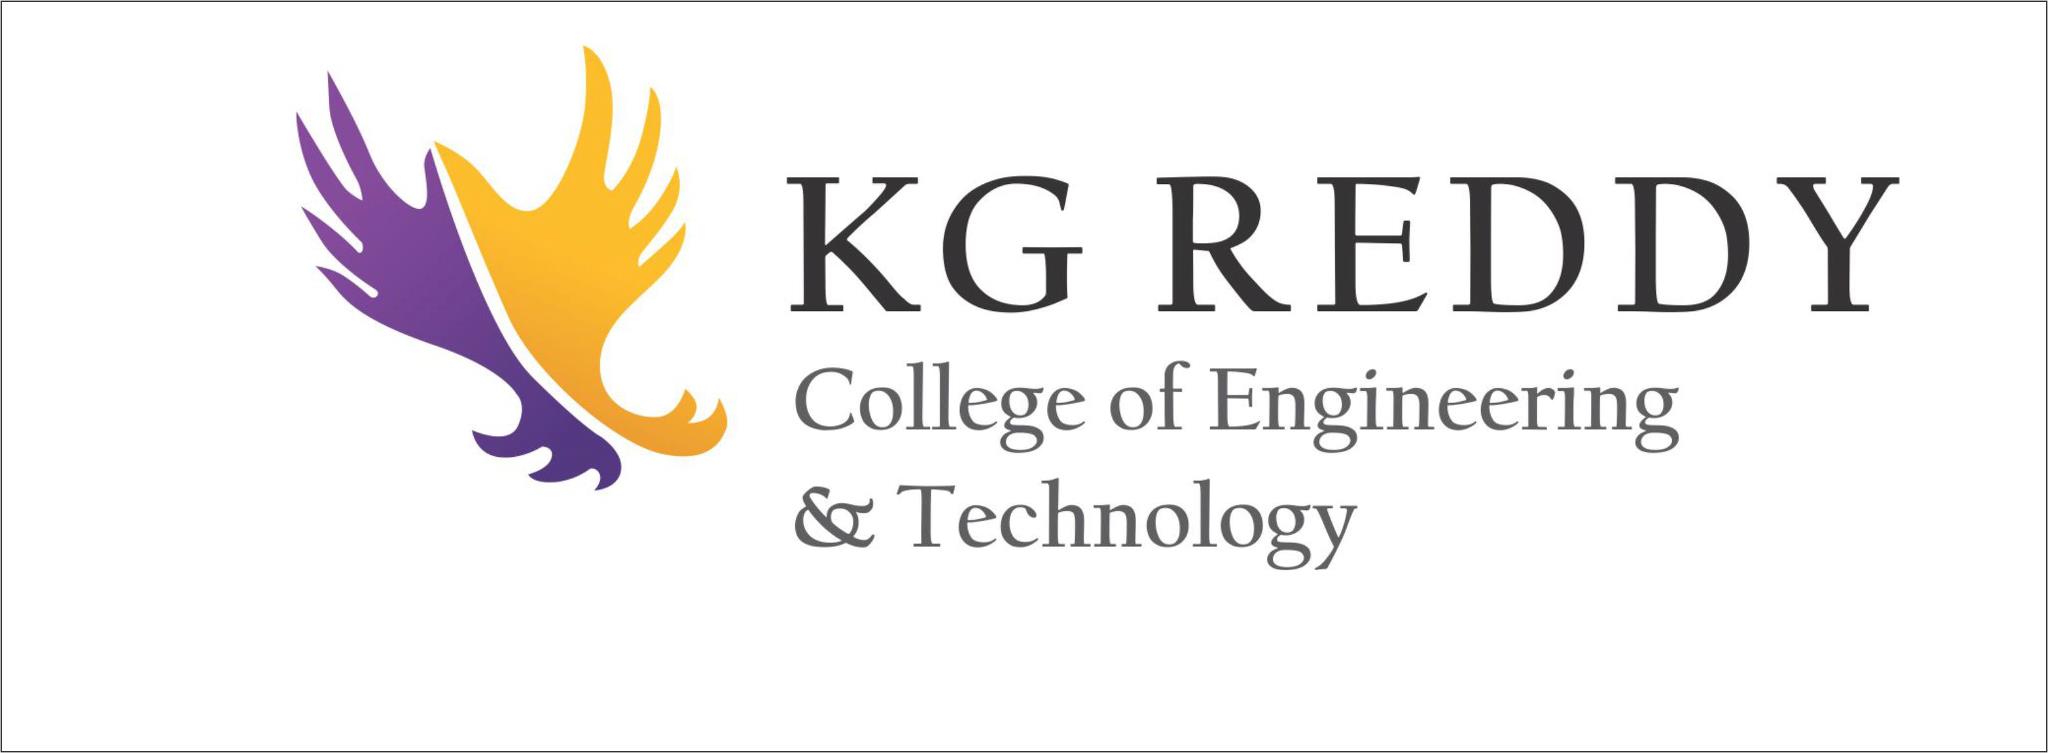 KG REDDY COLLEGE OF ENGINEERING & TECHNOLOGY